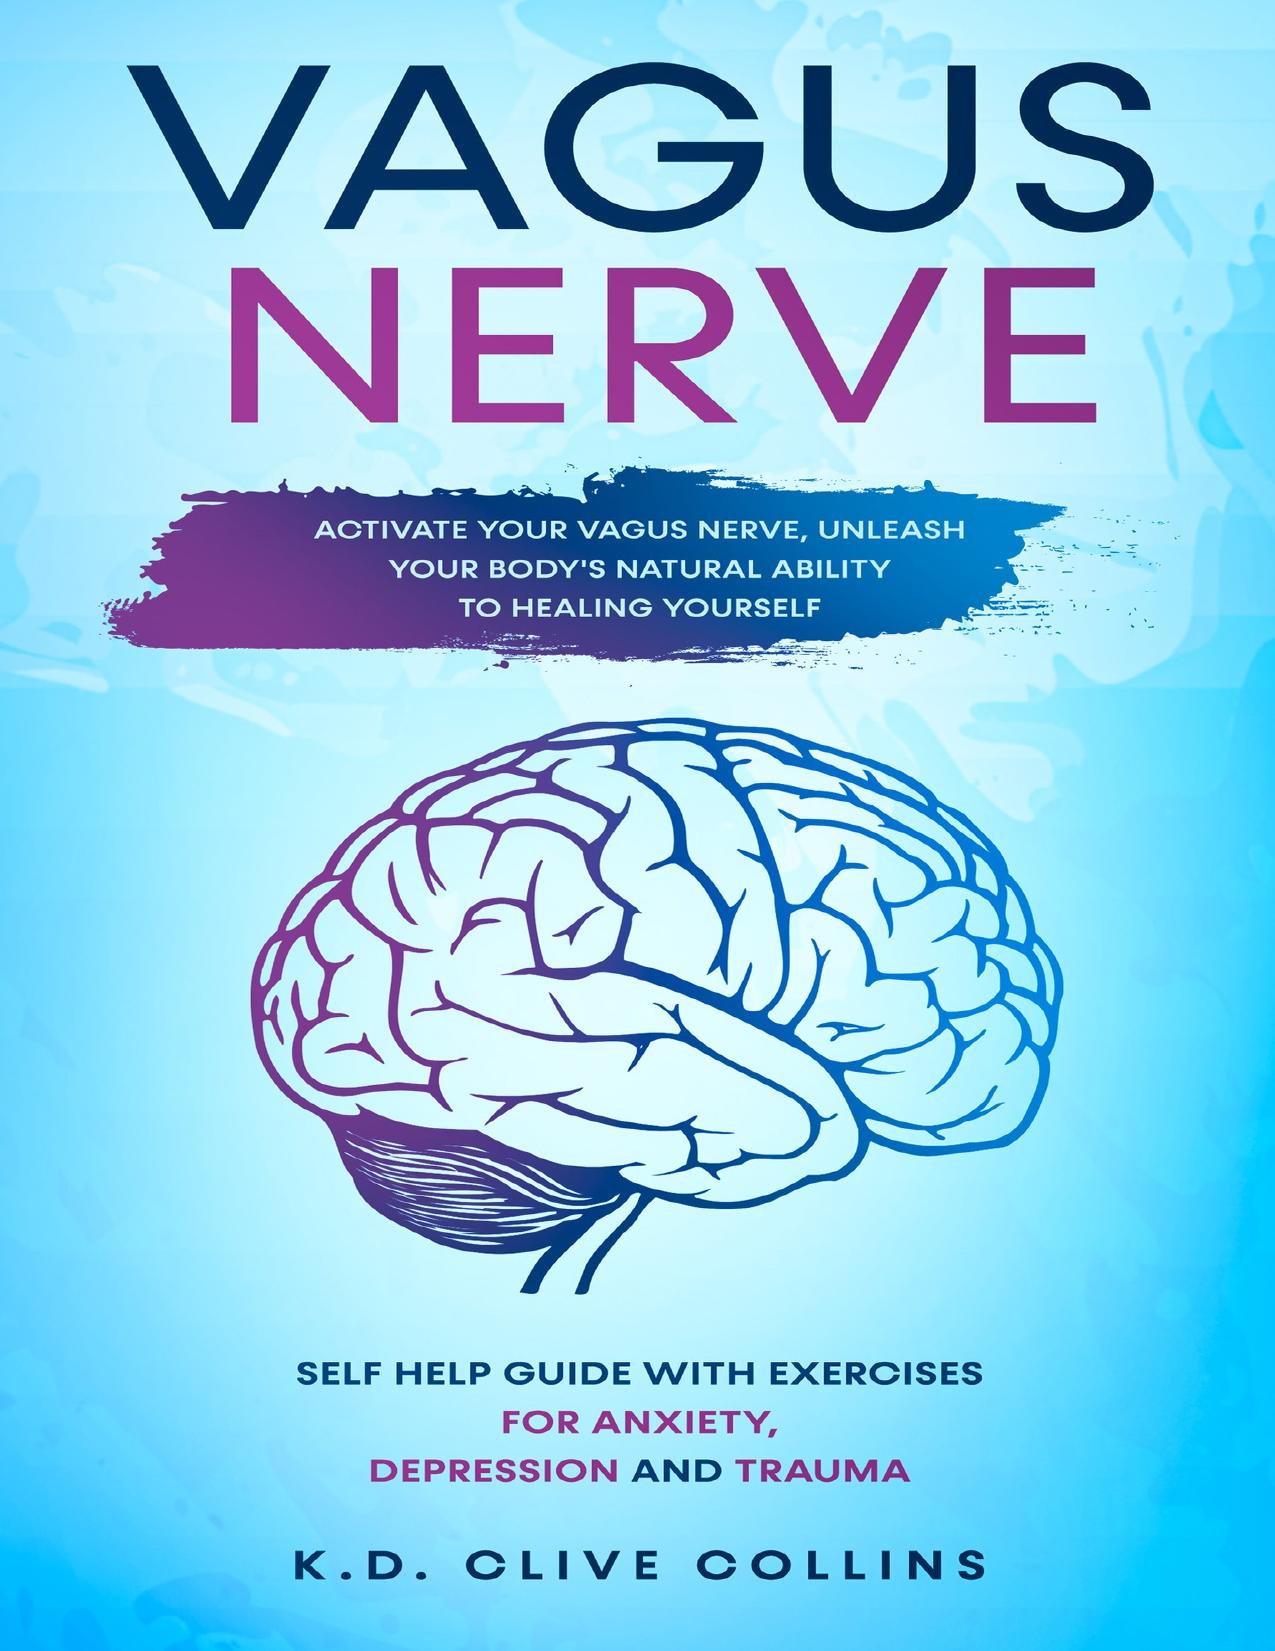 Vagus Nerve: Activate your Vagus Nerve,unleash your body's natural ability to healing yourself. Self Help guide with excercises for anxiety,depression and trauma. by Collins K.D. Clive